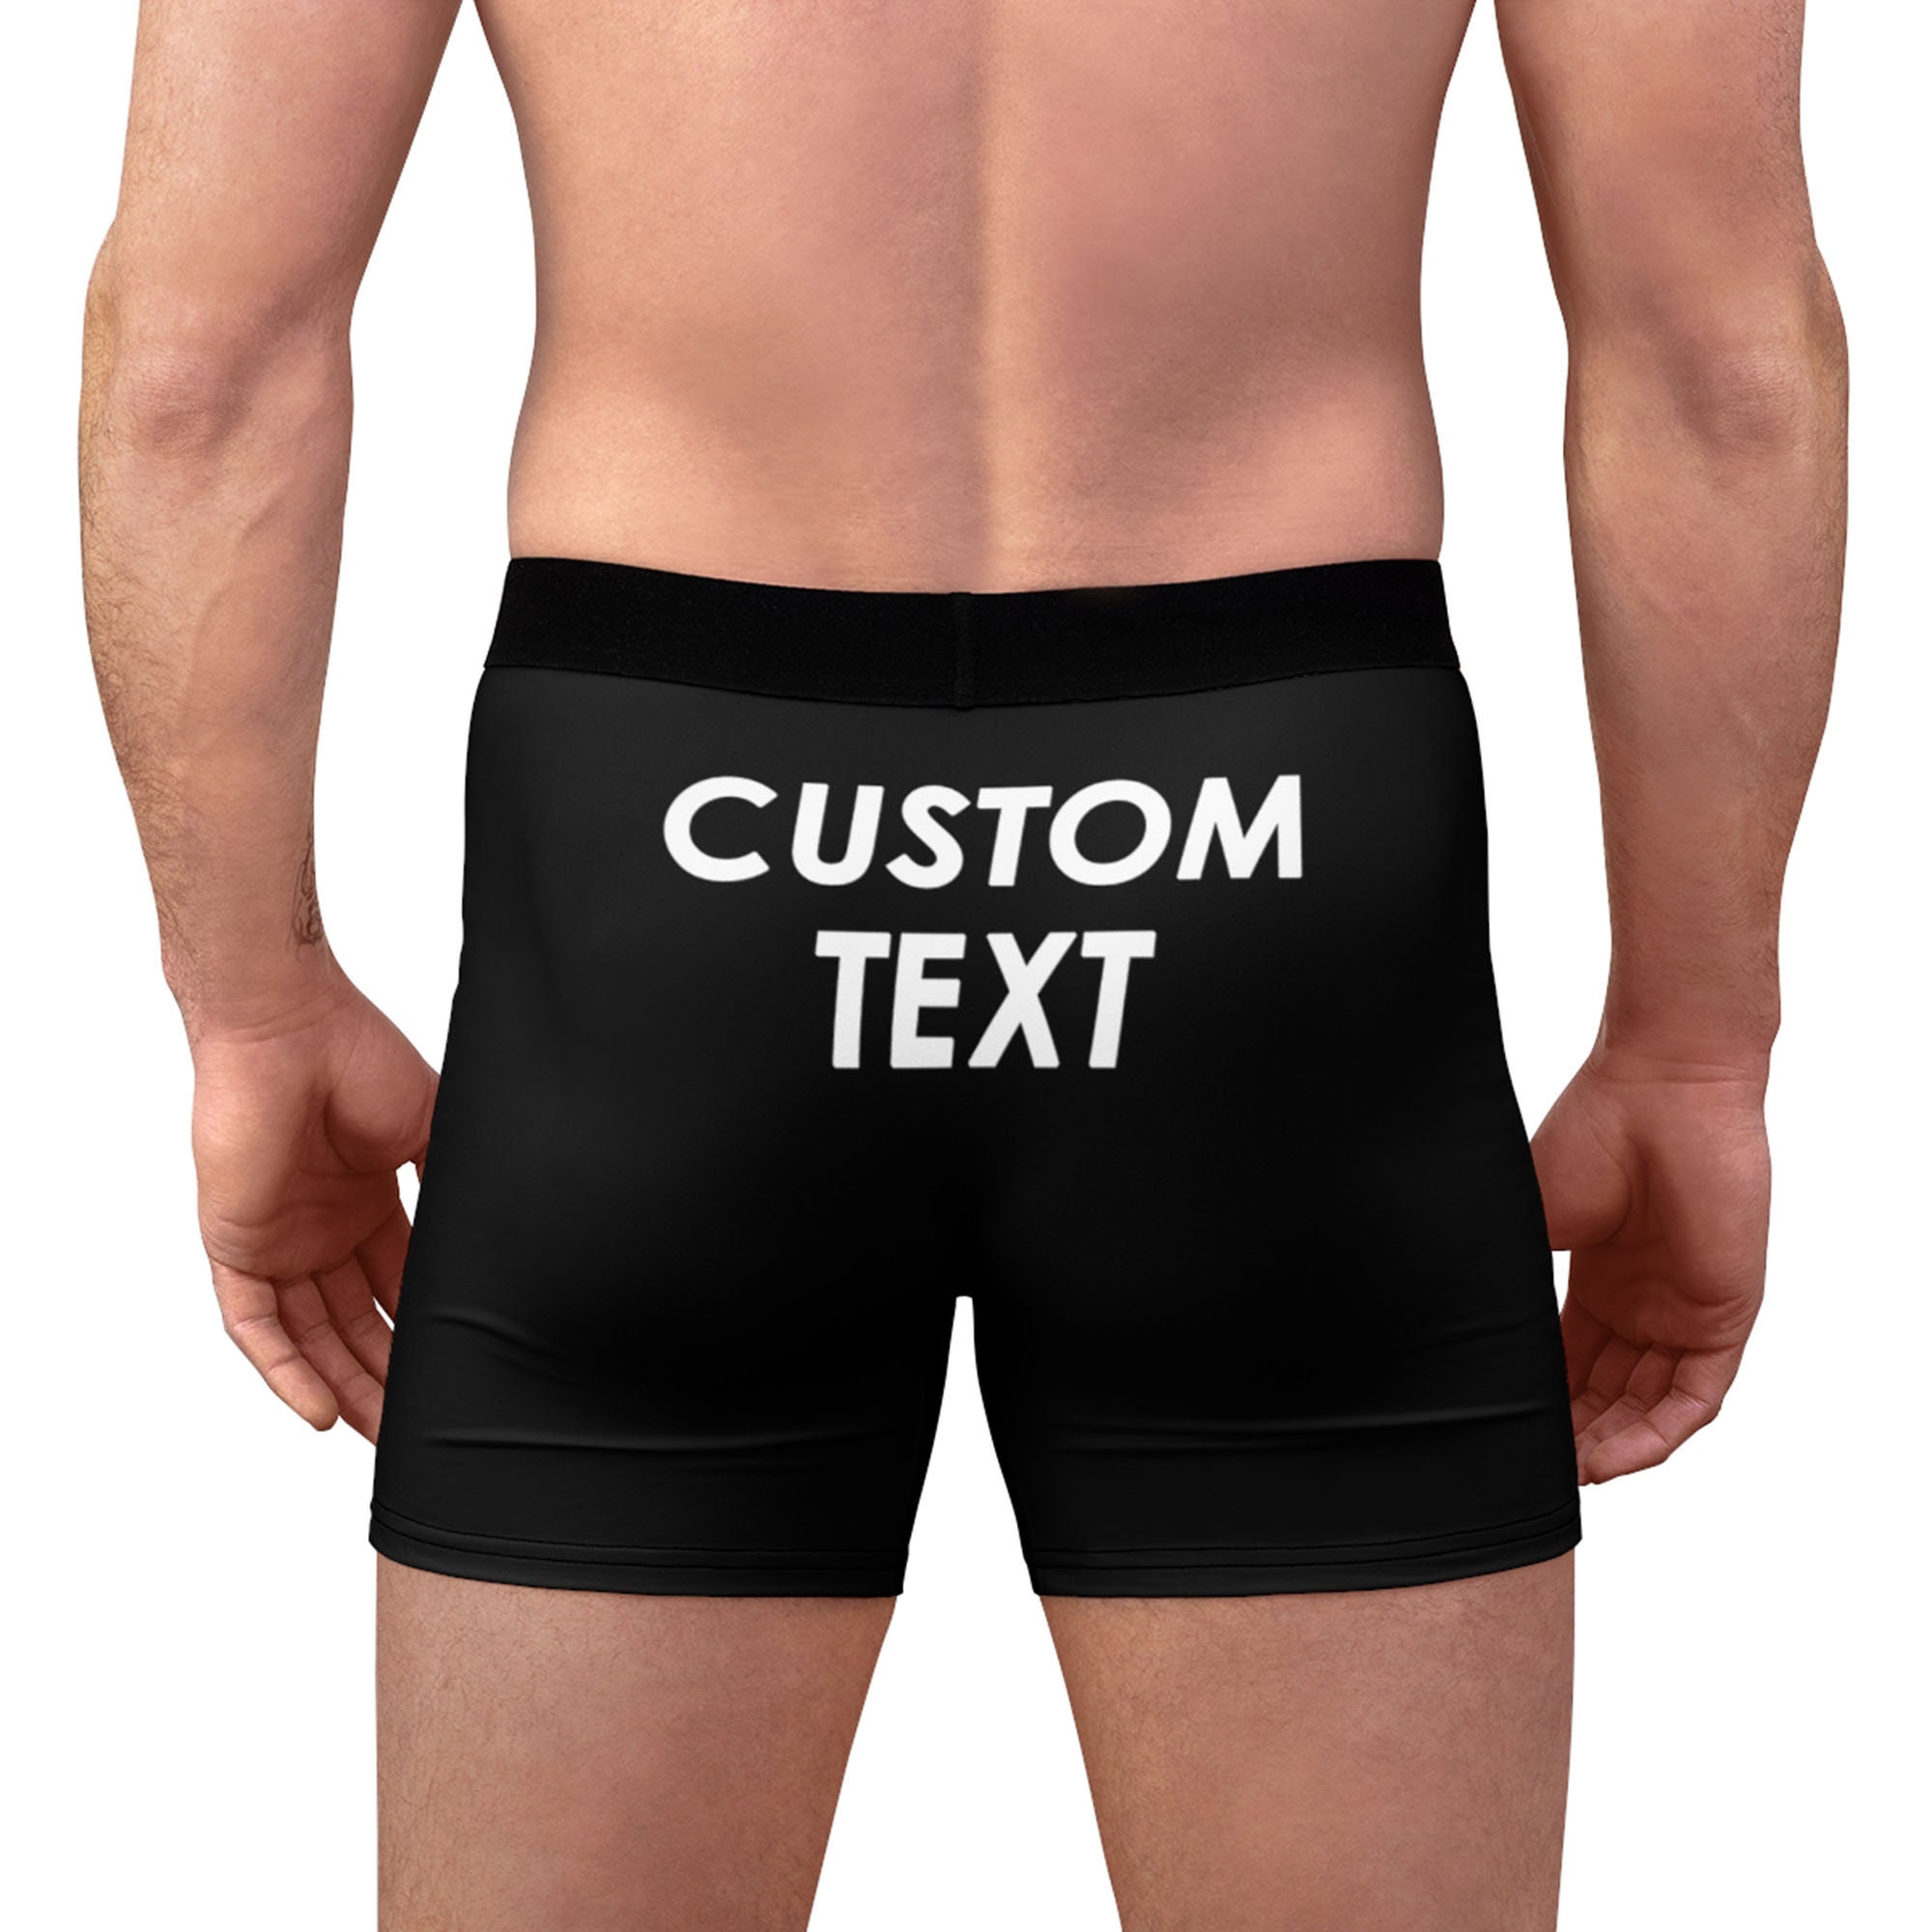 Personalized boxers briefs with photo – Giftpassion home